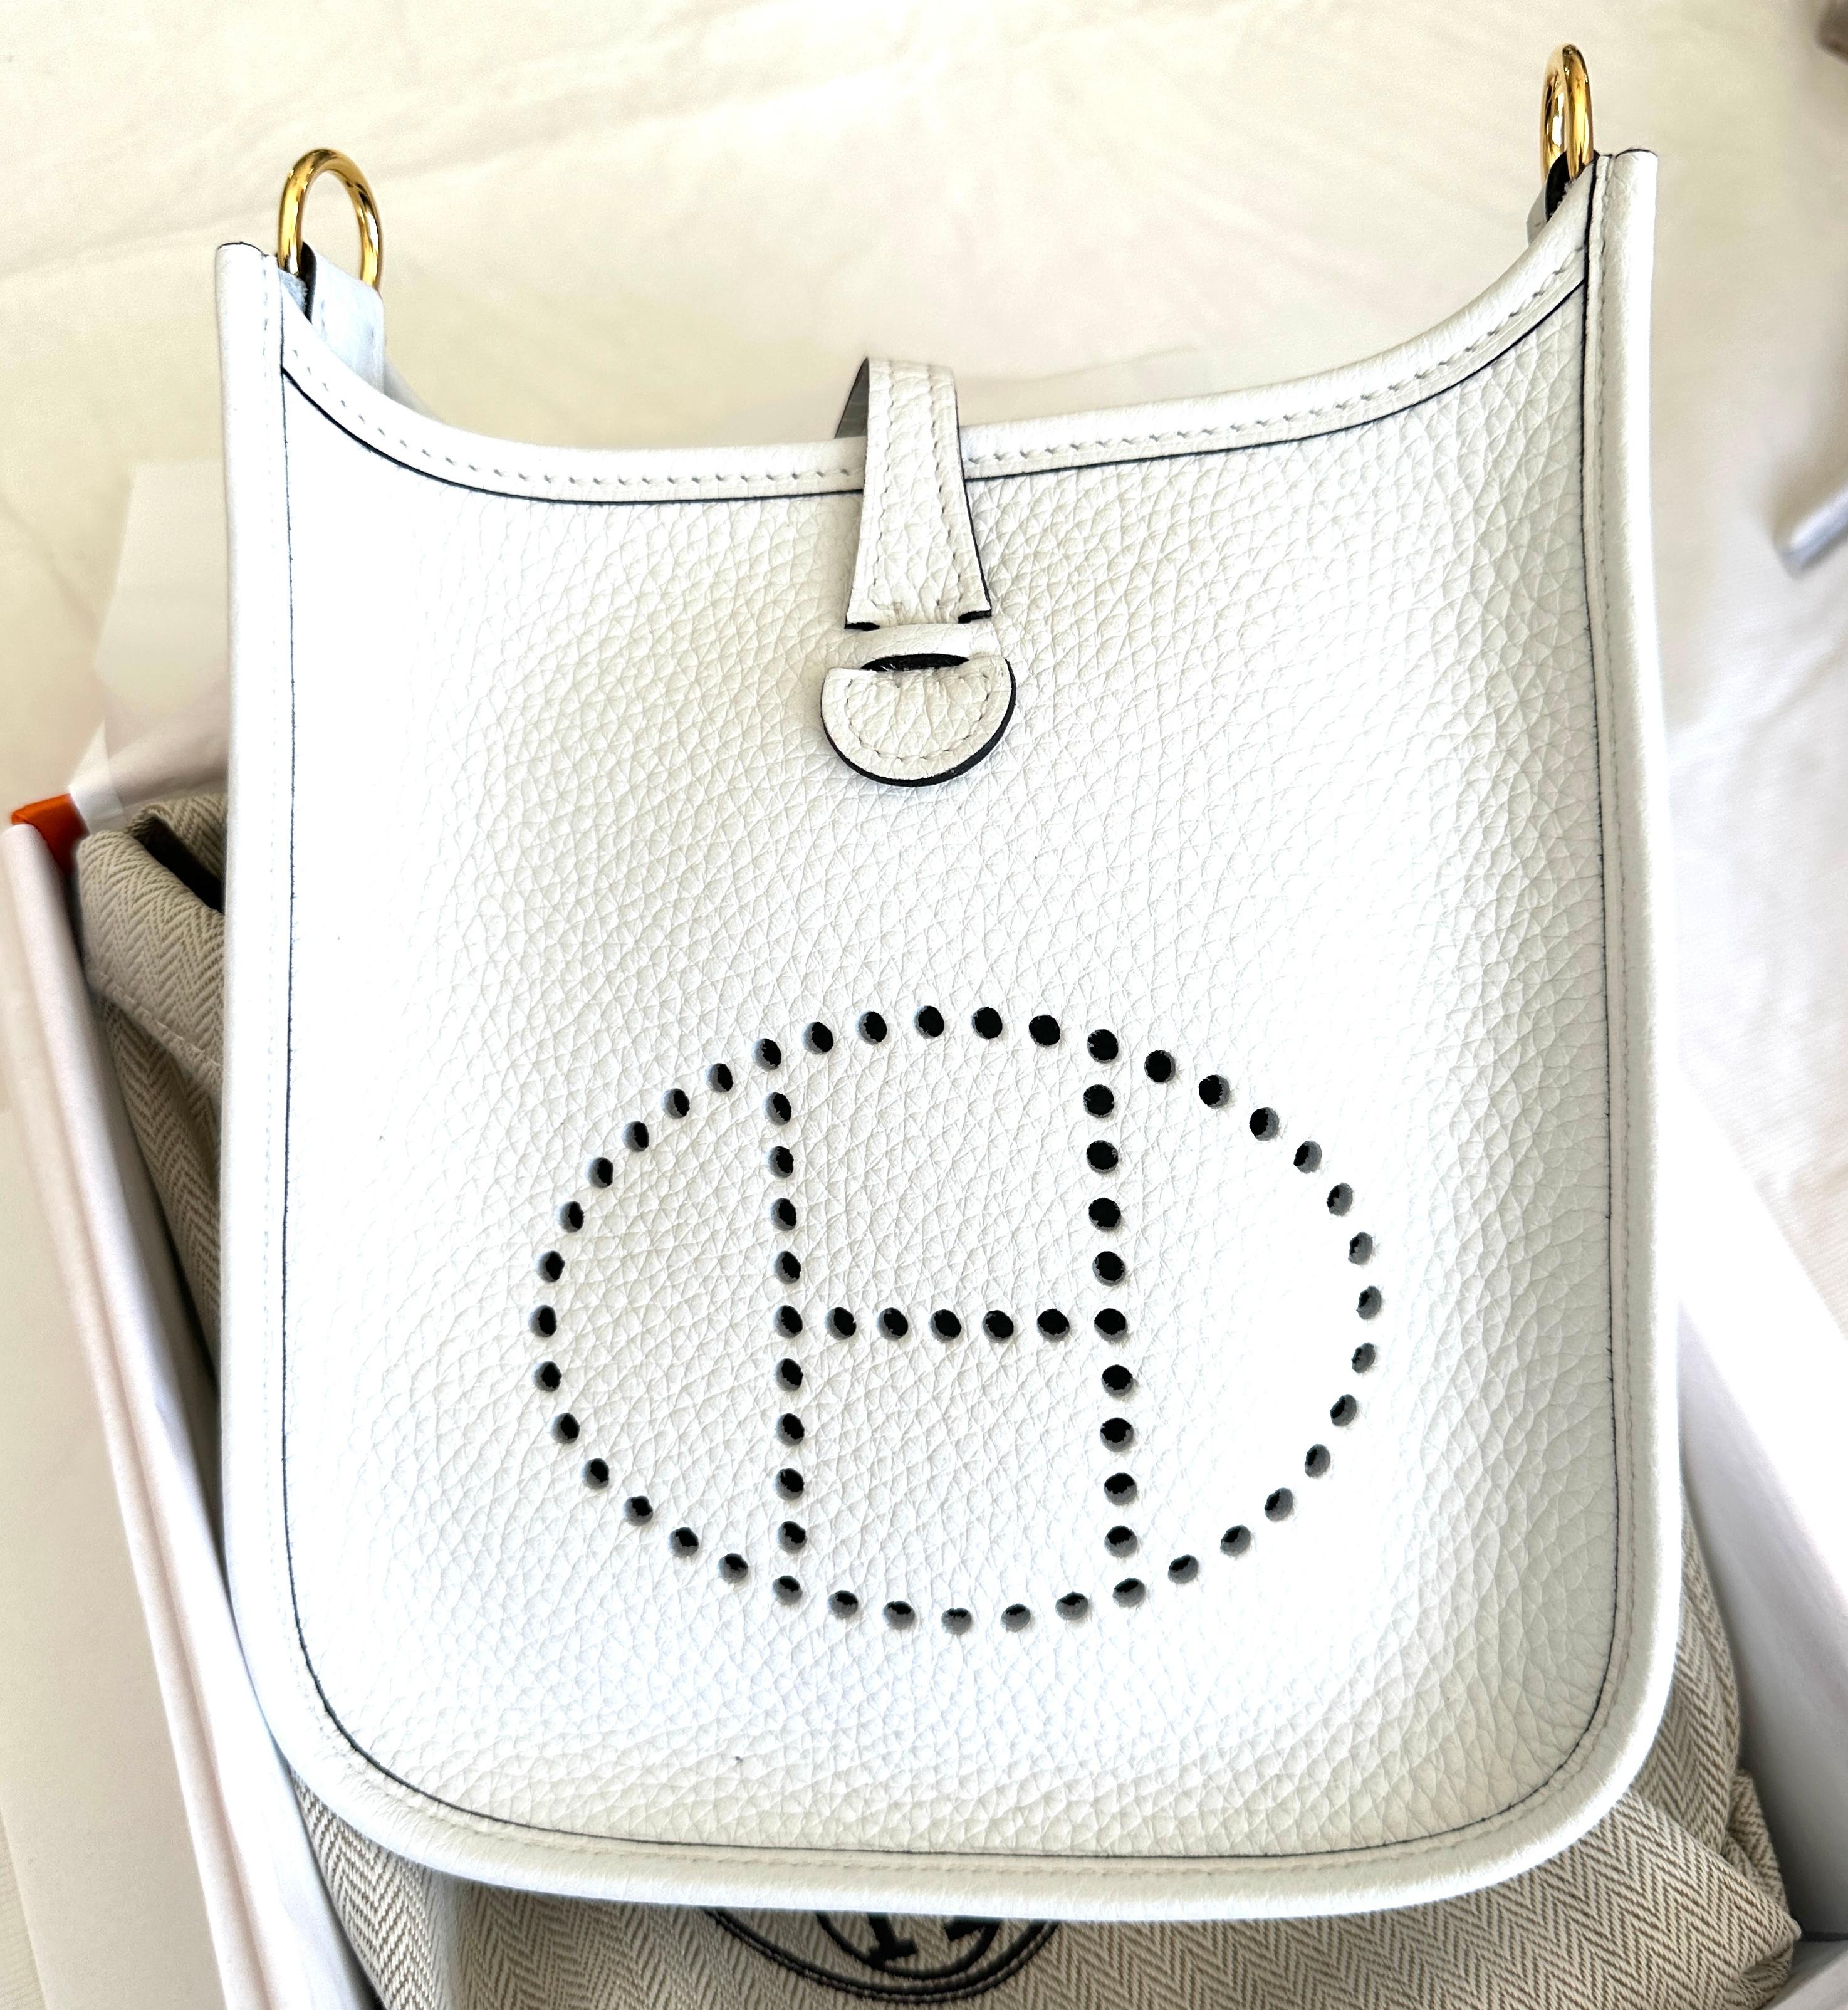 Hermes Evelyne Tpm 16
We have it in stock, ready, store fresh

This is the mini, the smallest size they make
The perfect neutral! Think spring summer

Color is New White
Comes with matching strap 

Collection B
Natural  interior
Gold plated